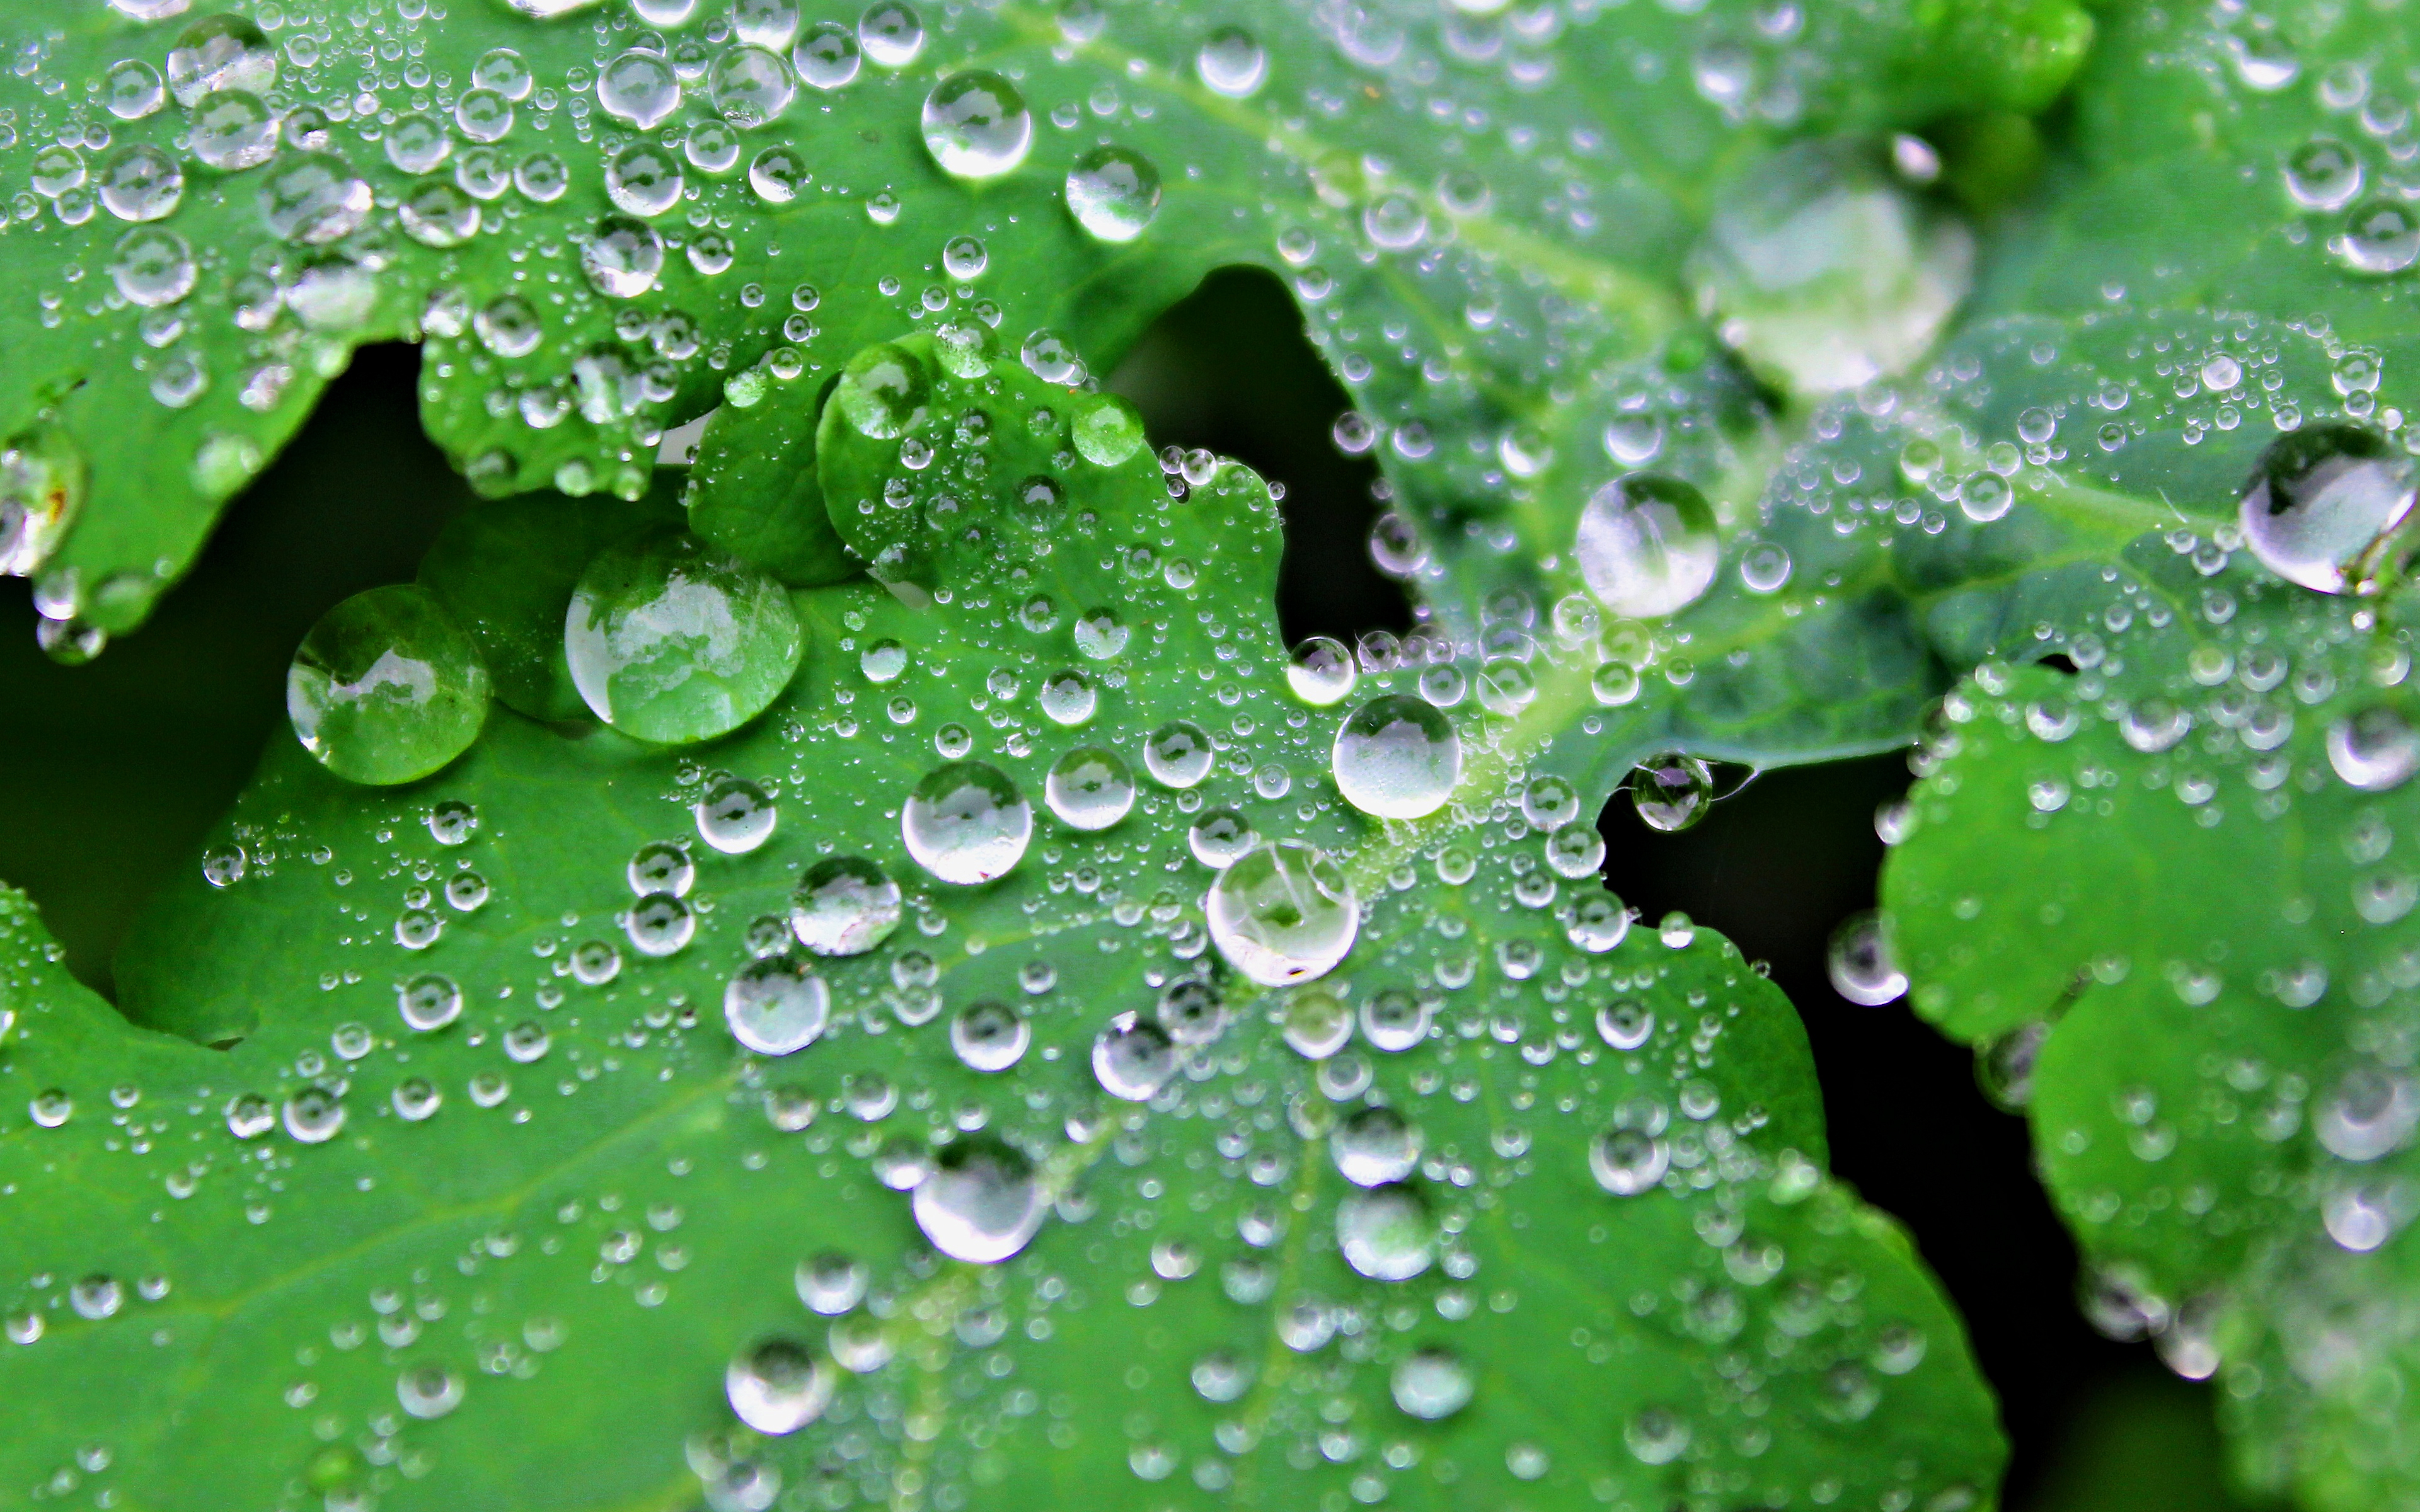 Water drops on leaves wallpapers and images - wallpapers ...
